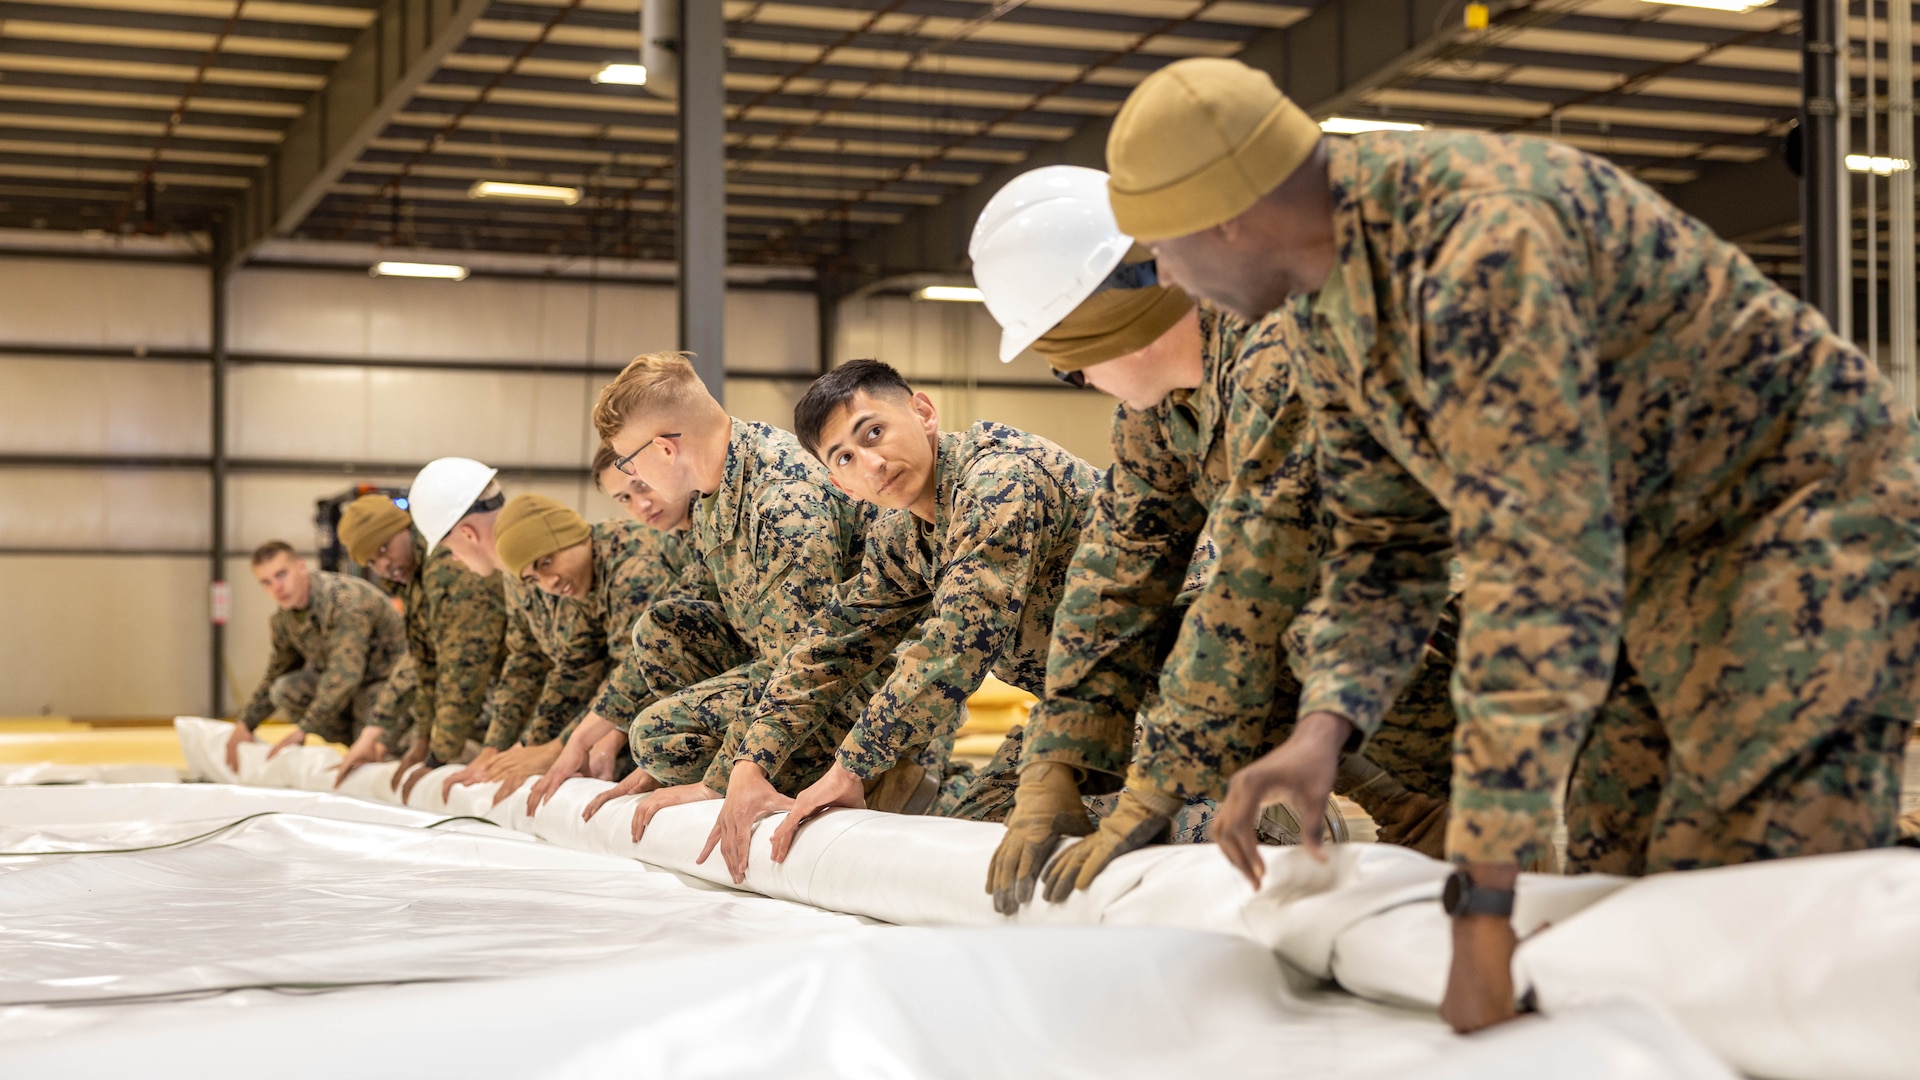 U.S. Marines with 1st Marine Expeditionary Force and 3rd Marine Expeditionary Force, help construct the Modular Fuel Tank System in South Bend, Indiana, April 18, 2023. The purpose of prototype tank capability training is to gain operational advantage in the emplacement of fuel storage capacity throughout the joint force and attendees of this training will become subject matter experts; able to train other Marines, members of the joint force, and personnel across our network of allies and partners. The new fuel system only requires a small team to construct and can move with the unit to austere environments. (U.S. Marine Corps photo by Cpl. Haley Fourmet Gustavsen)